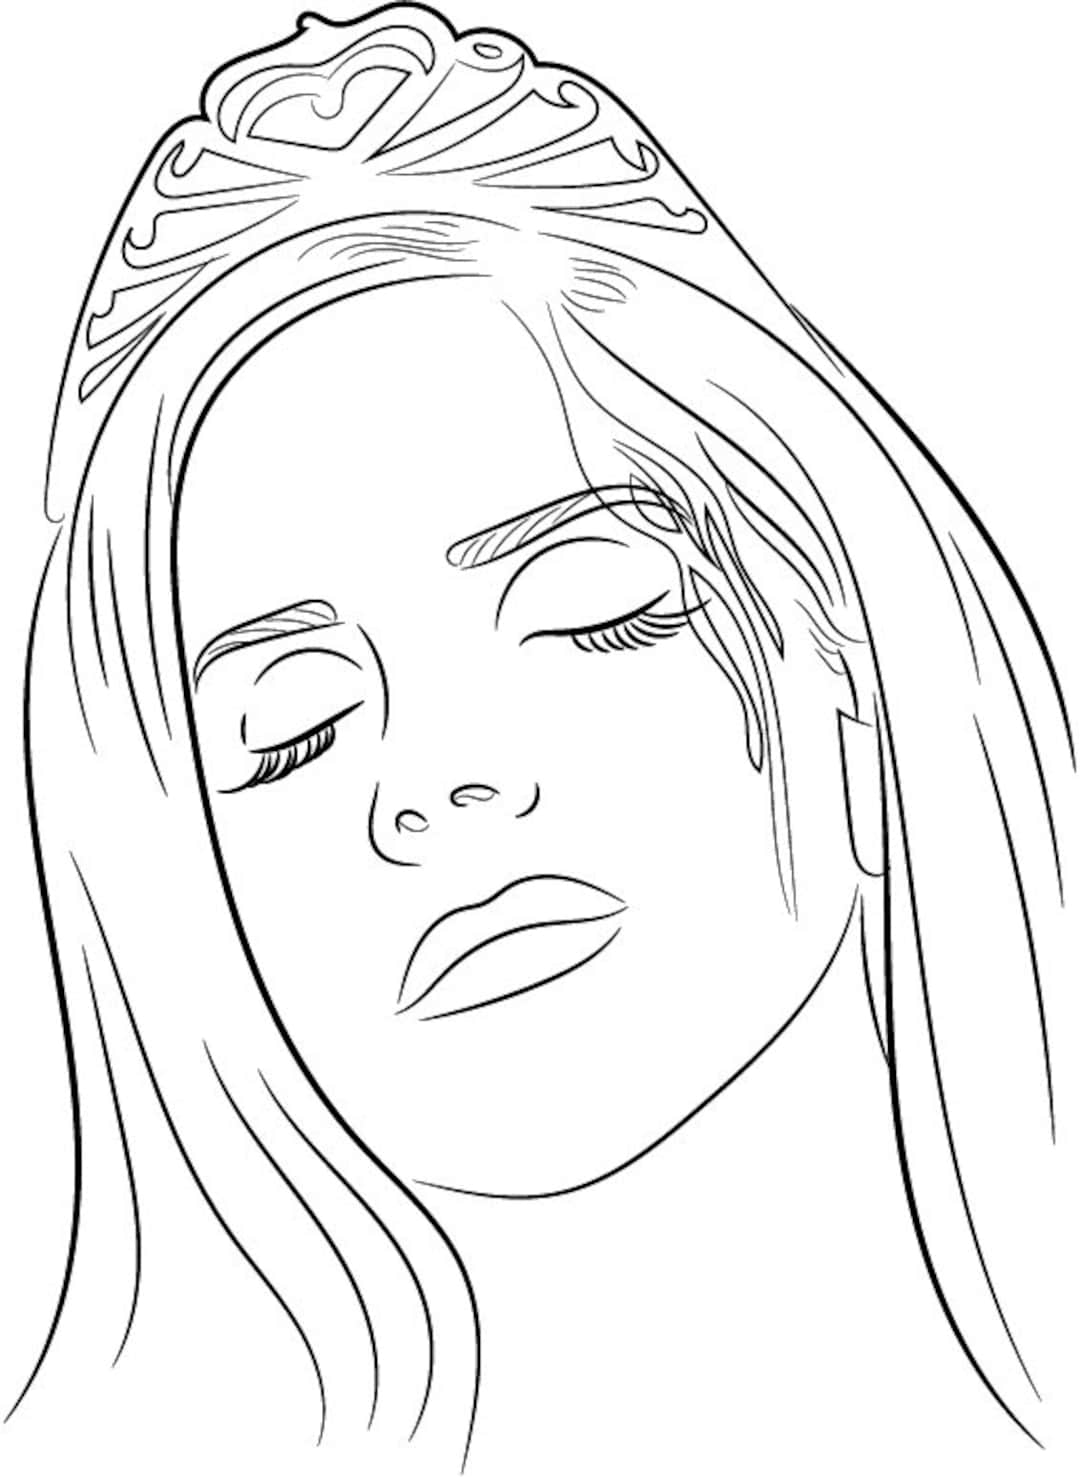 Lana Del Rey Art for Coloring Embroidery Printable Instant - Etsy